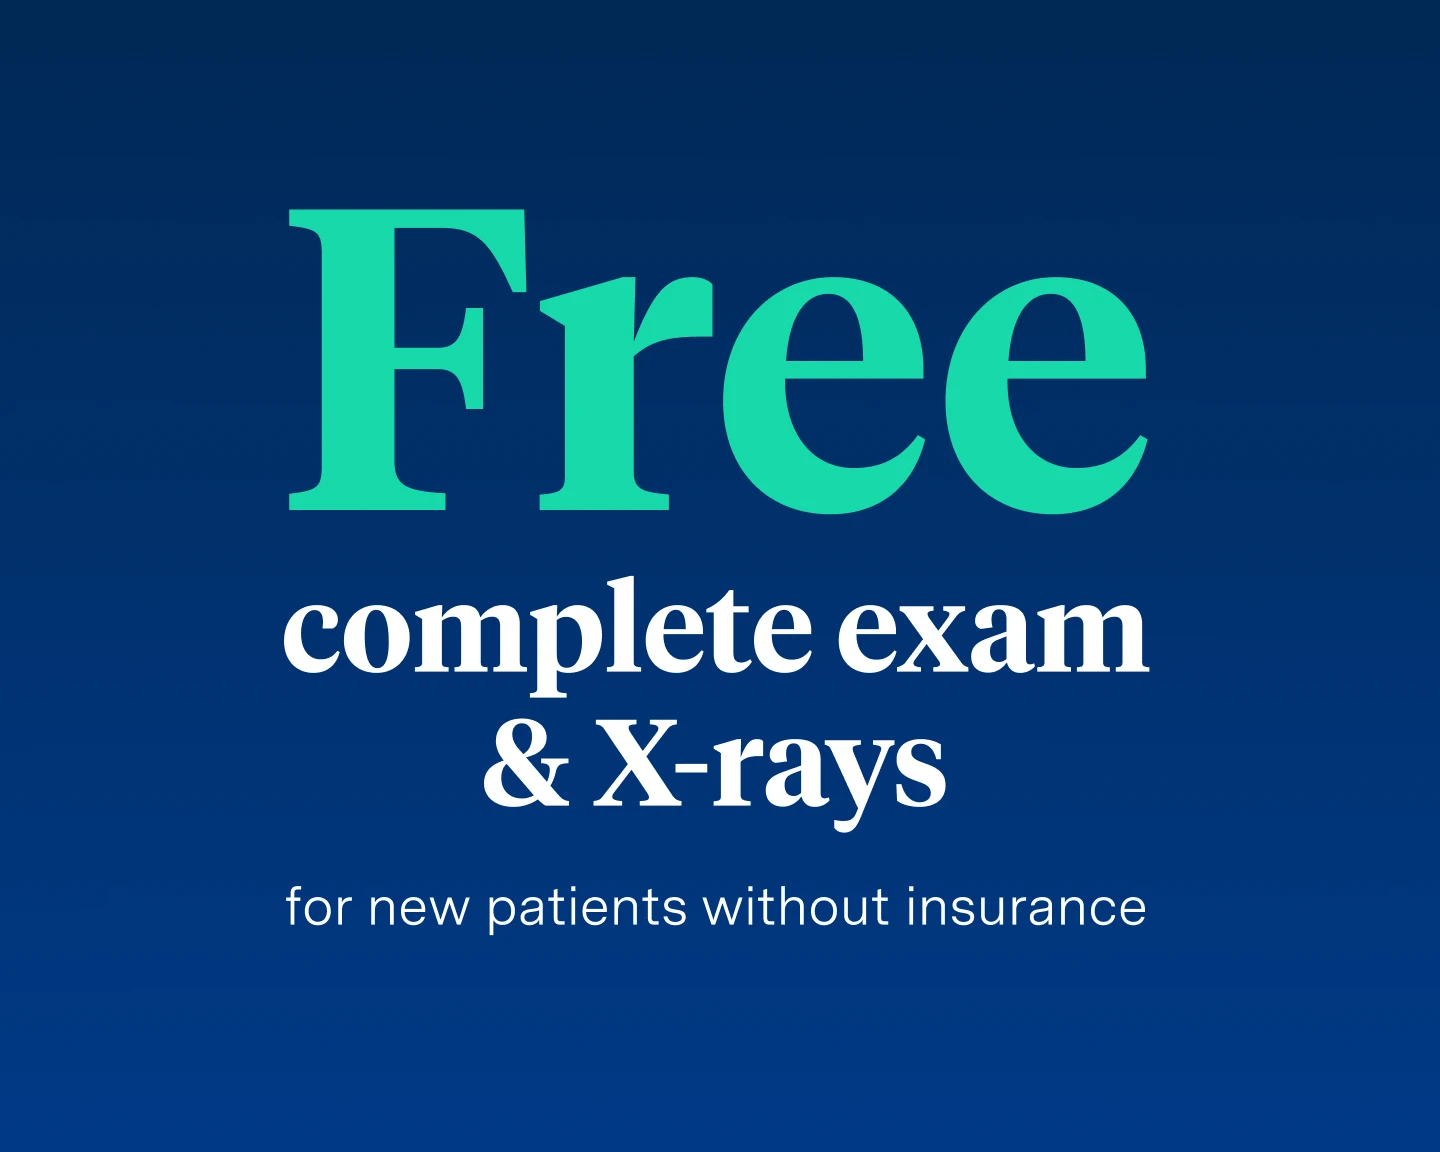 Free complete exam & X-rays for new patients without insurance. 